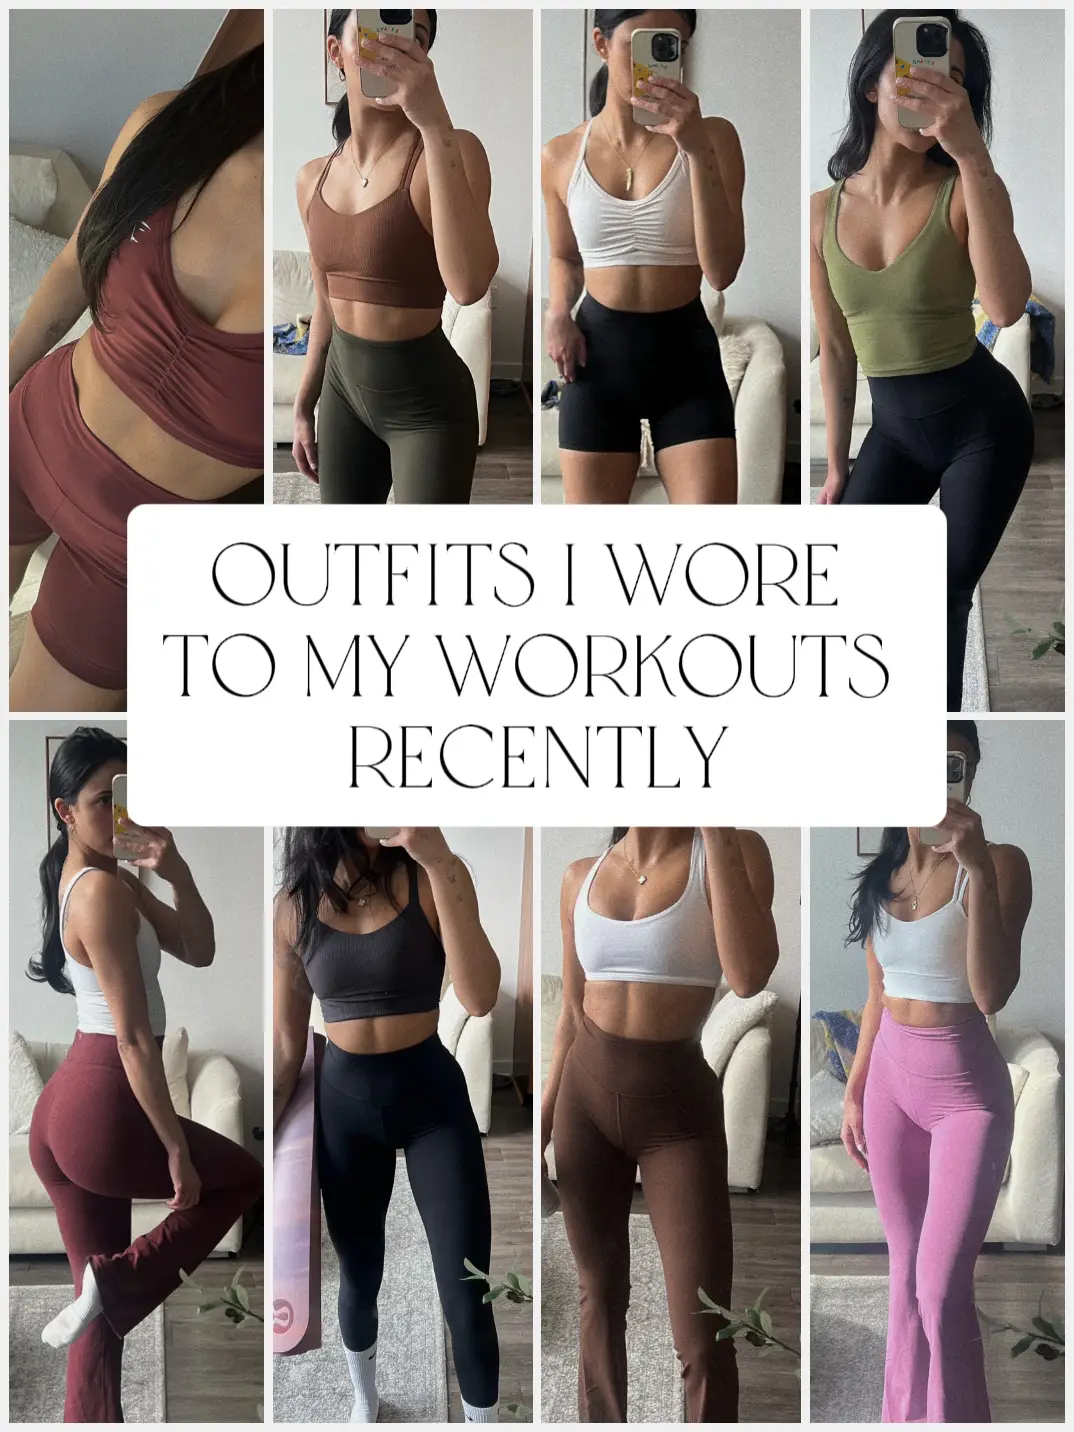 🧘🏽‍♀️ OUTFITS I WORE TO WORKOUT RECENTLY, Gallery posted by gigi